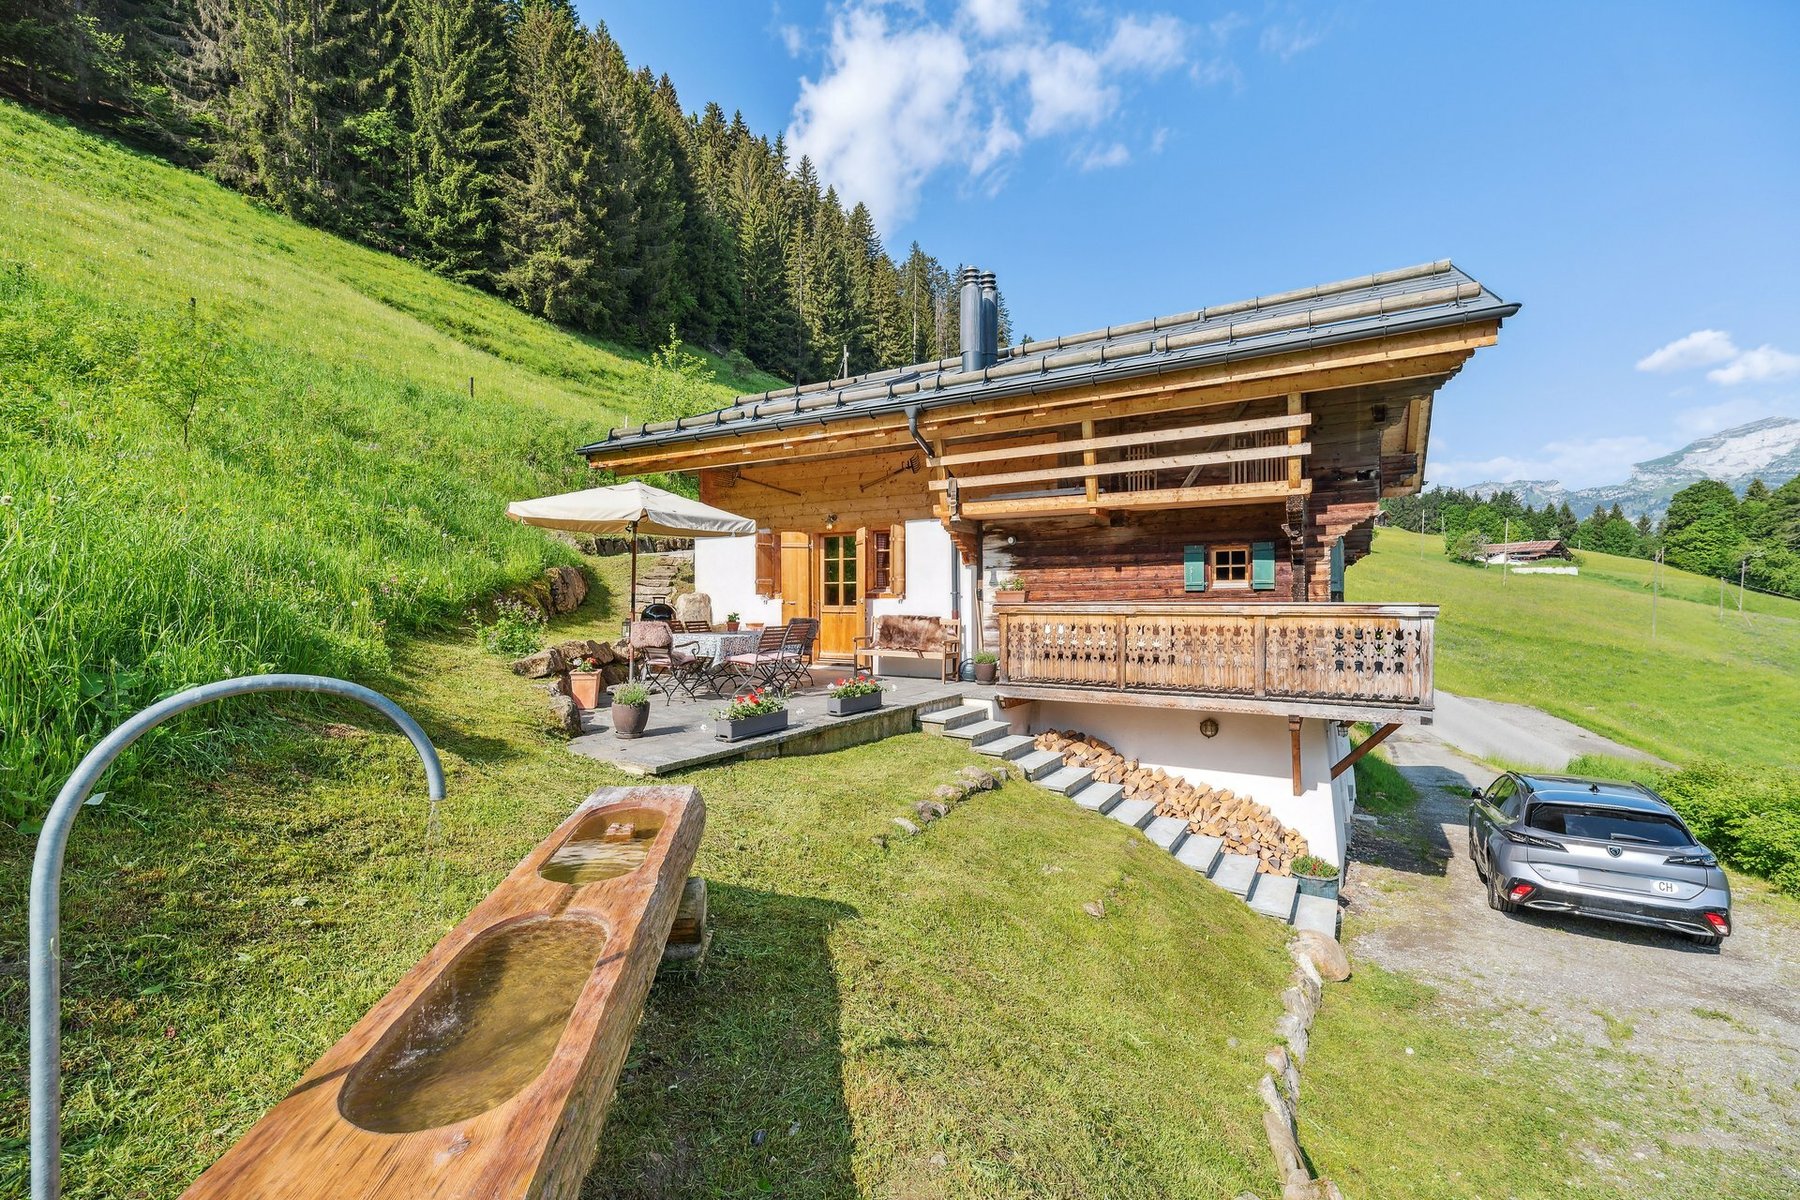 Authentic Ormonan chalet rebuilt in the heart of nature